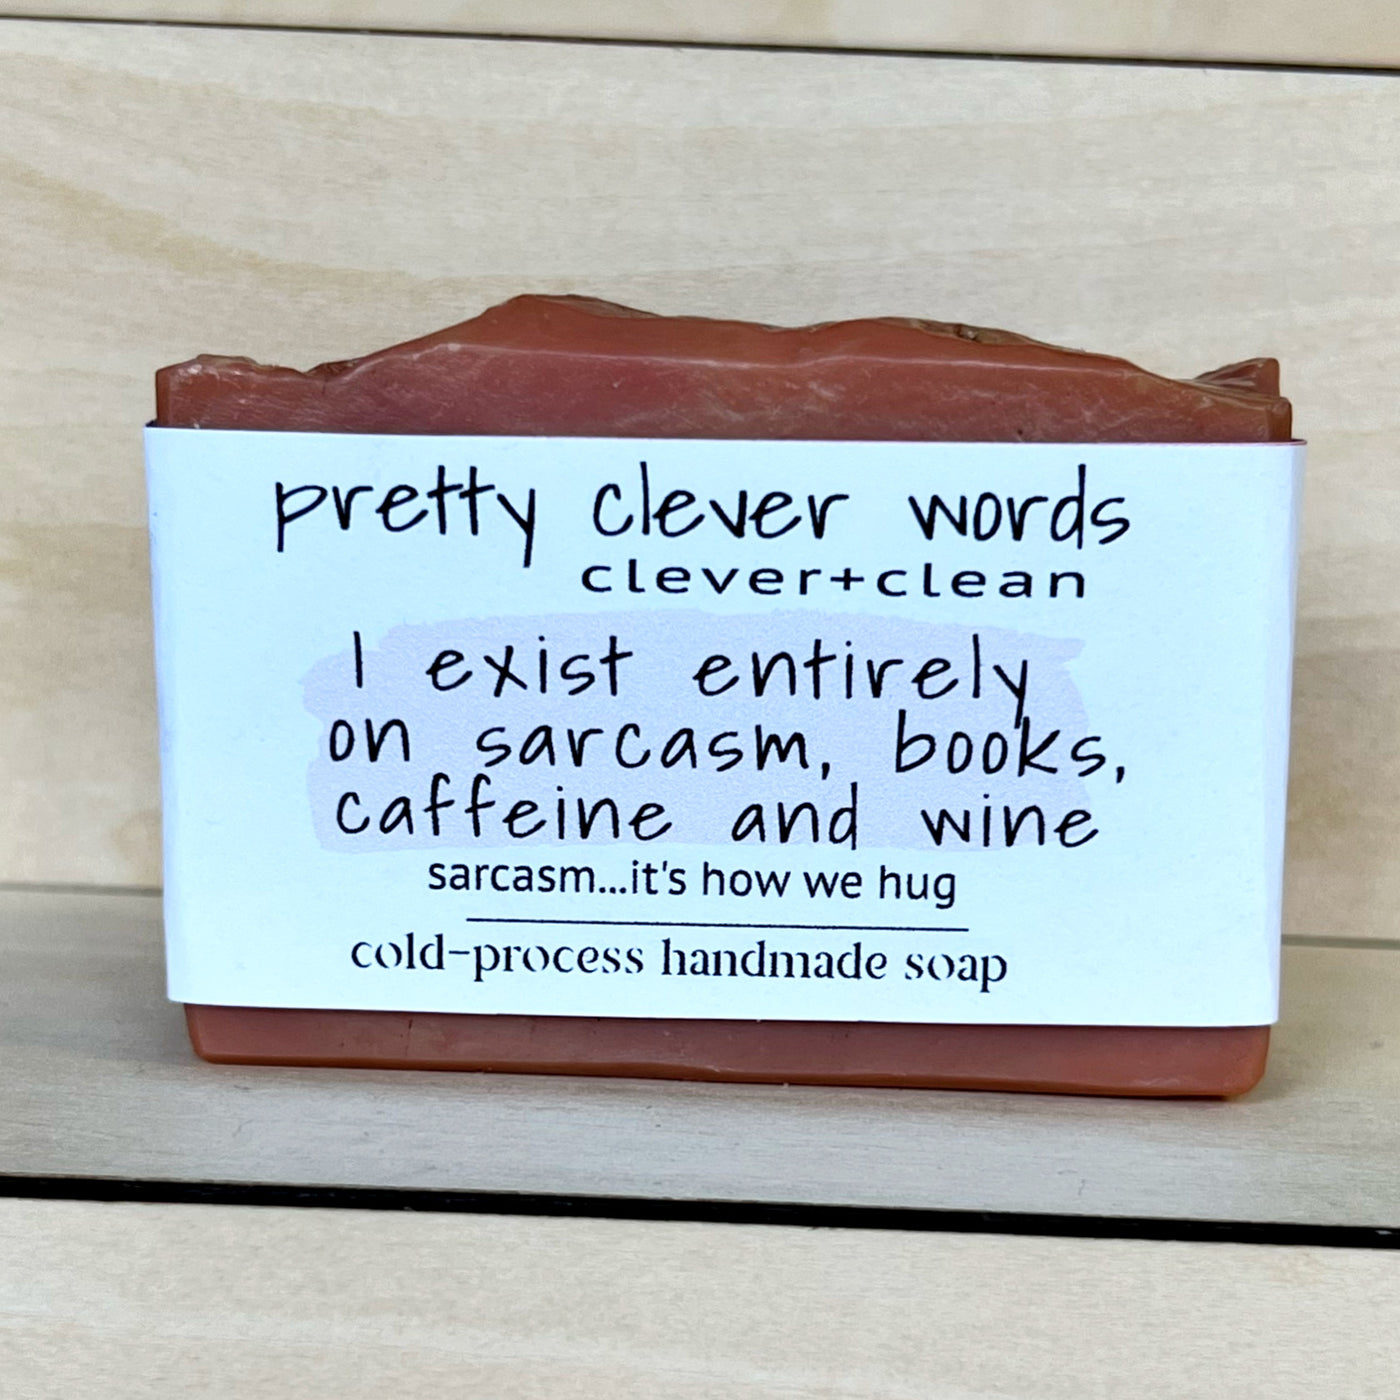 clever+clean rose clay bar soap - i exist entirely on sarcasm and caffeine